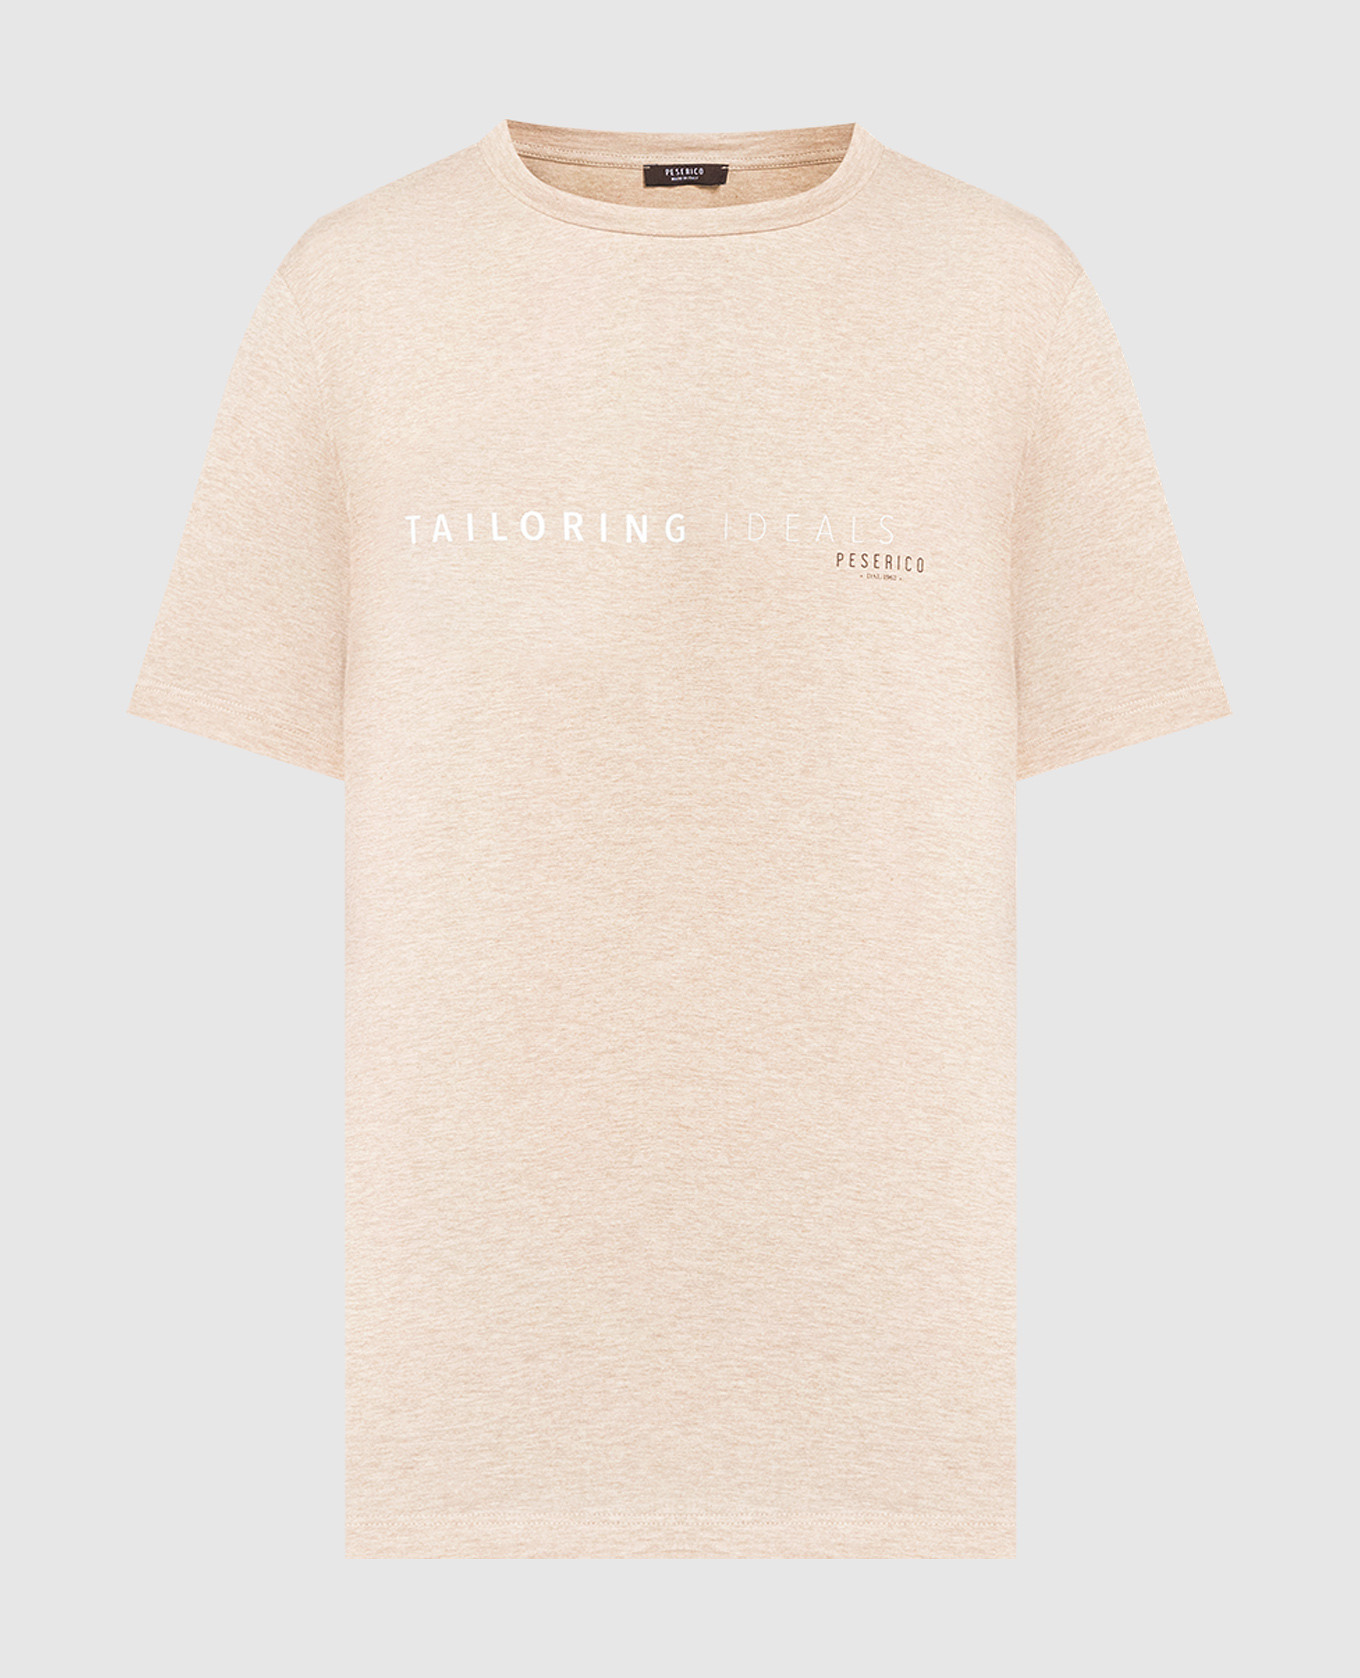 Beige t-shirt with a print